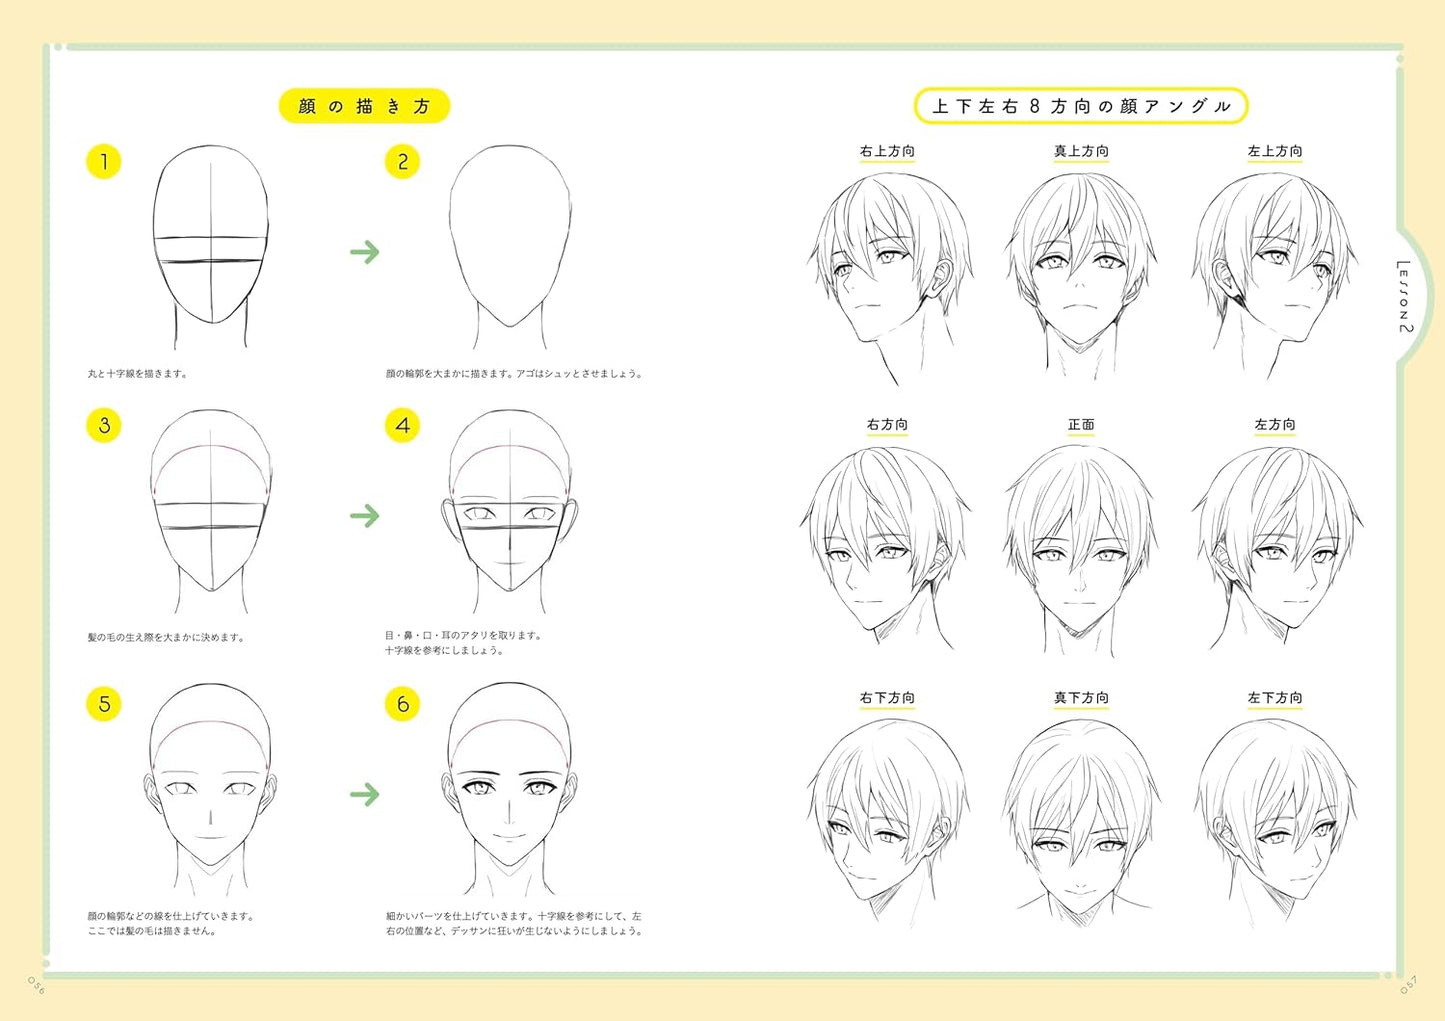 How to draw boy characters taught by 4 professional artists